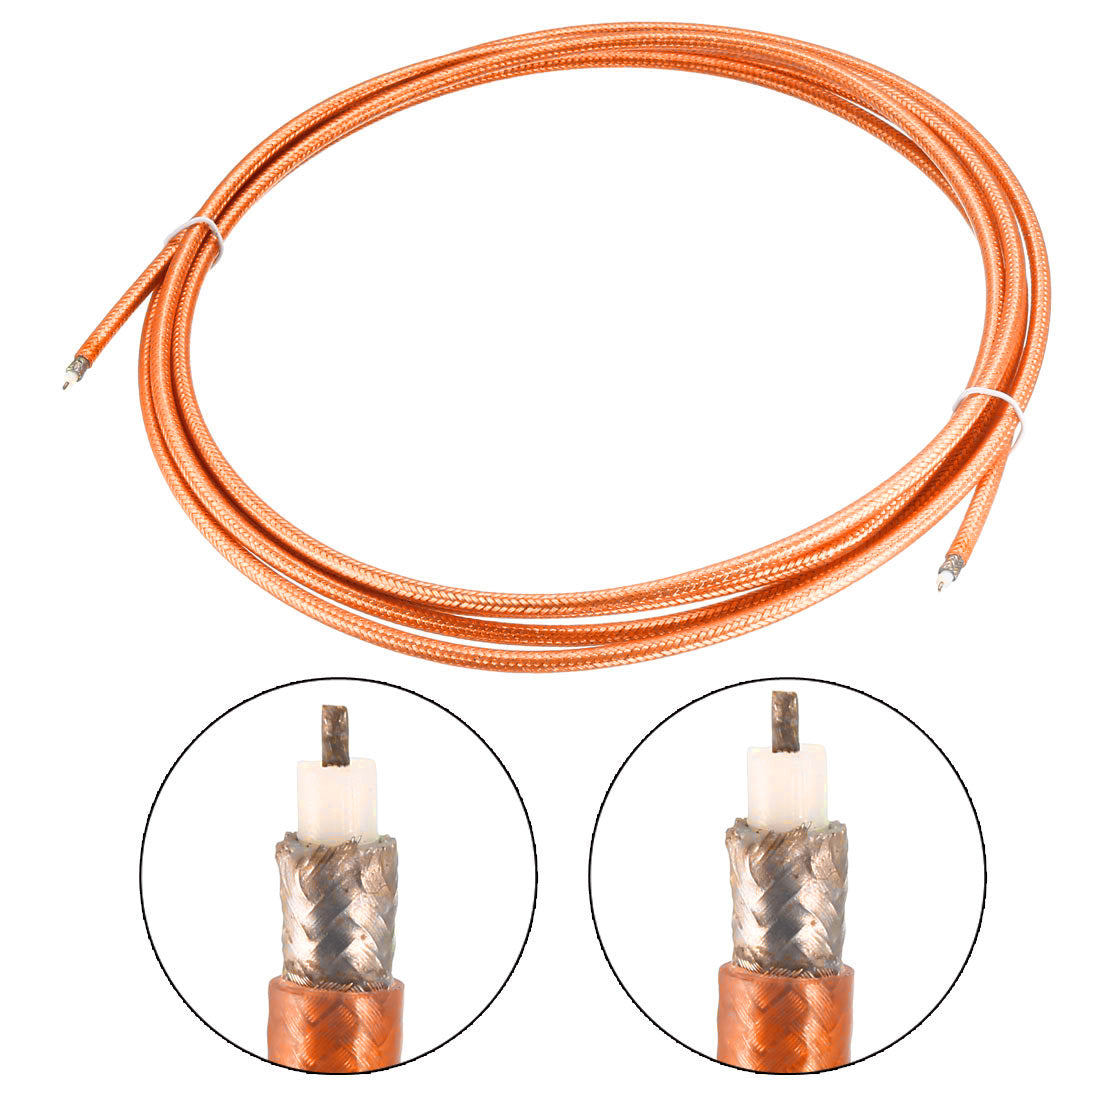 uxcell Uxcell RF Coaxial Cable RG400 Antenna Extension Cable 50 ohm - 10 feet